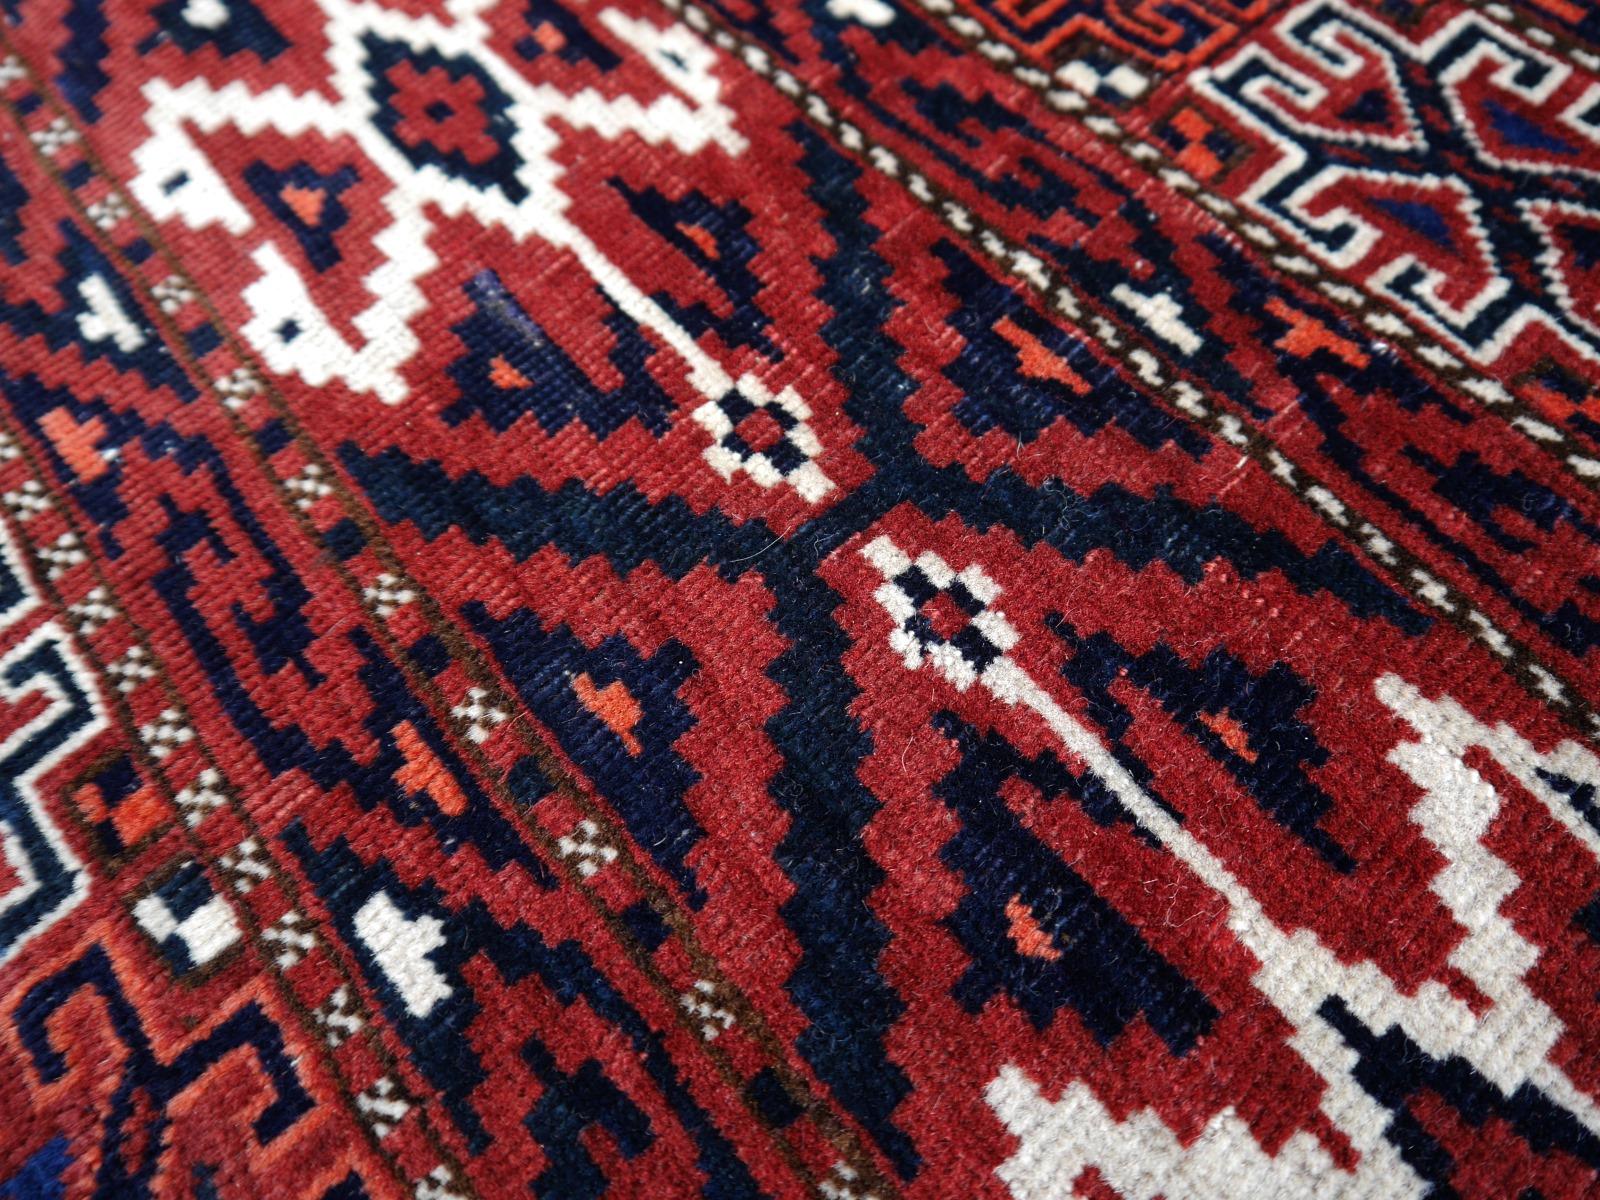 Yomud Tribeal Turkmen Turkoman Antique Rug with Ram Motive Hand Knotted Carpet For Sale 5